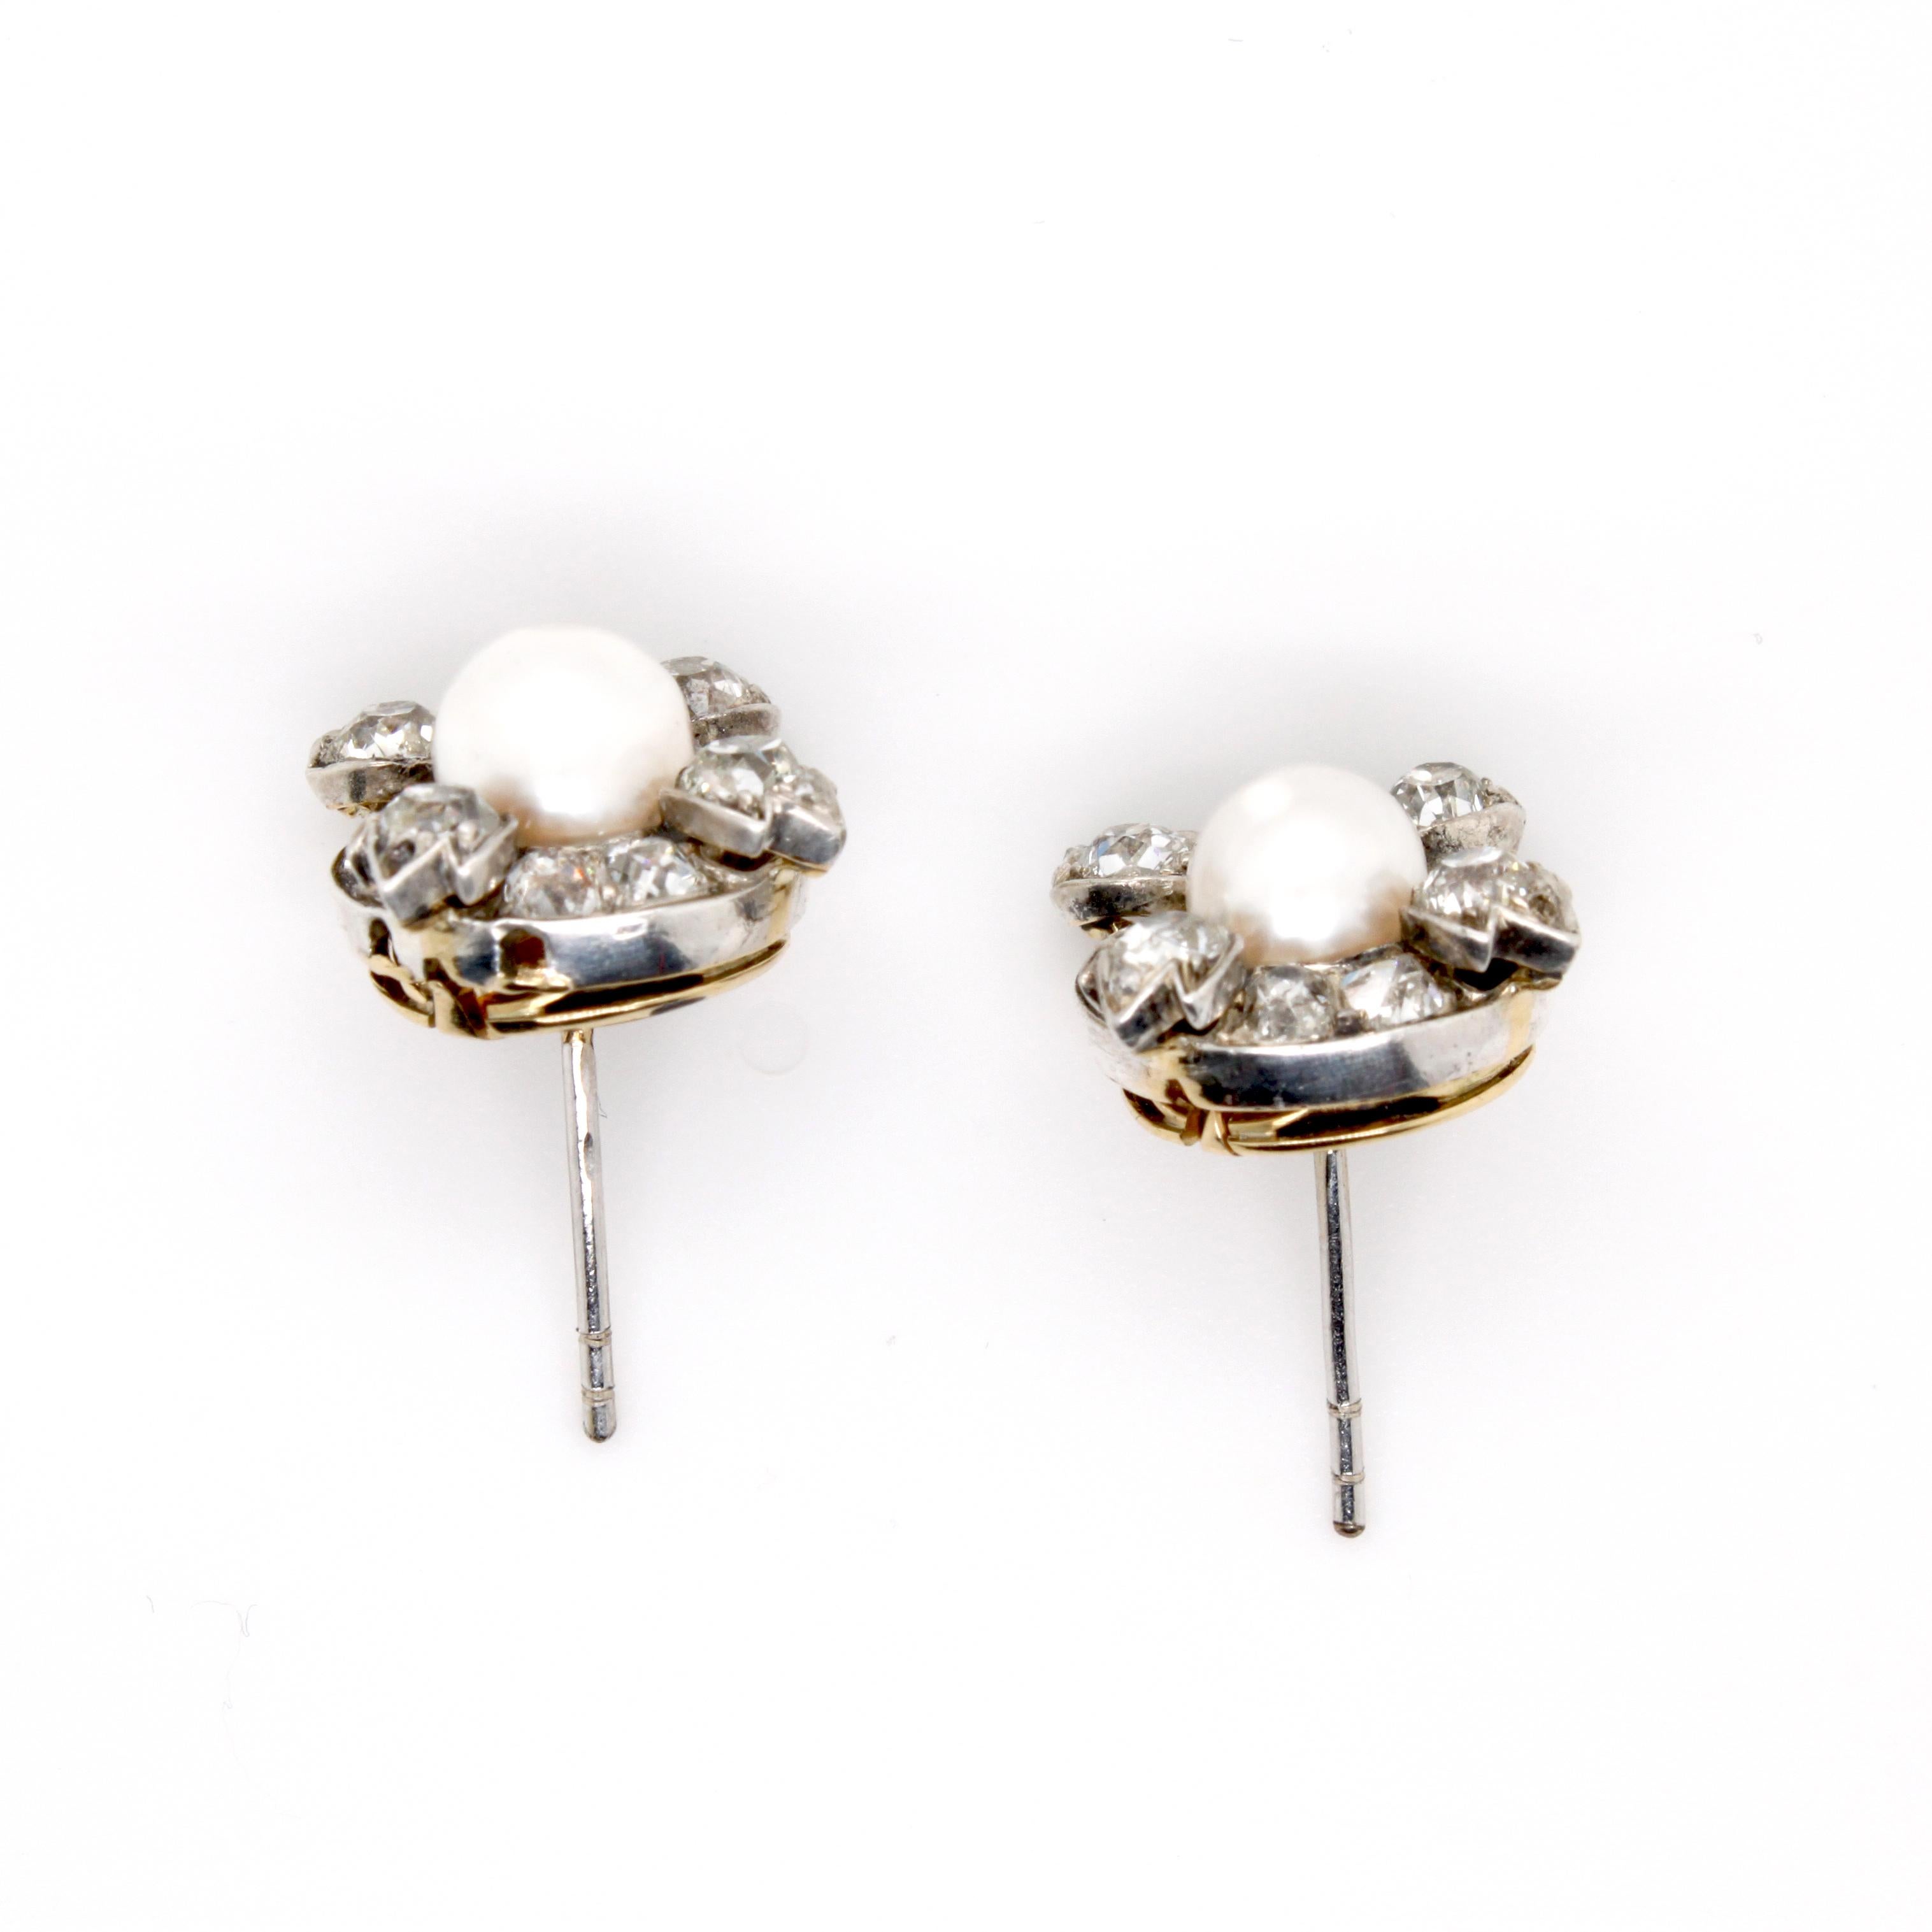 Women's Victorian Natural Pearl and Diamond Cluster Earrings, circa 1880s